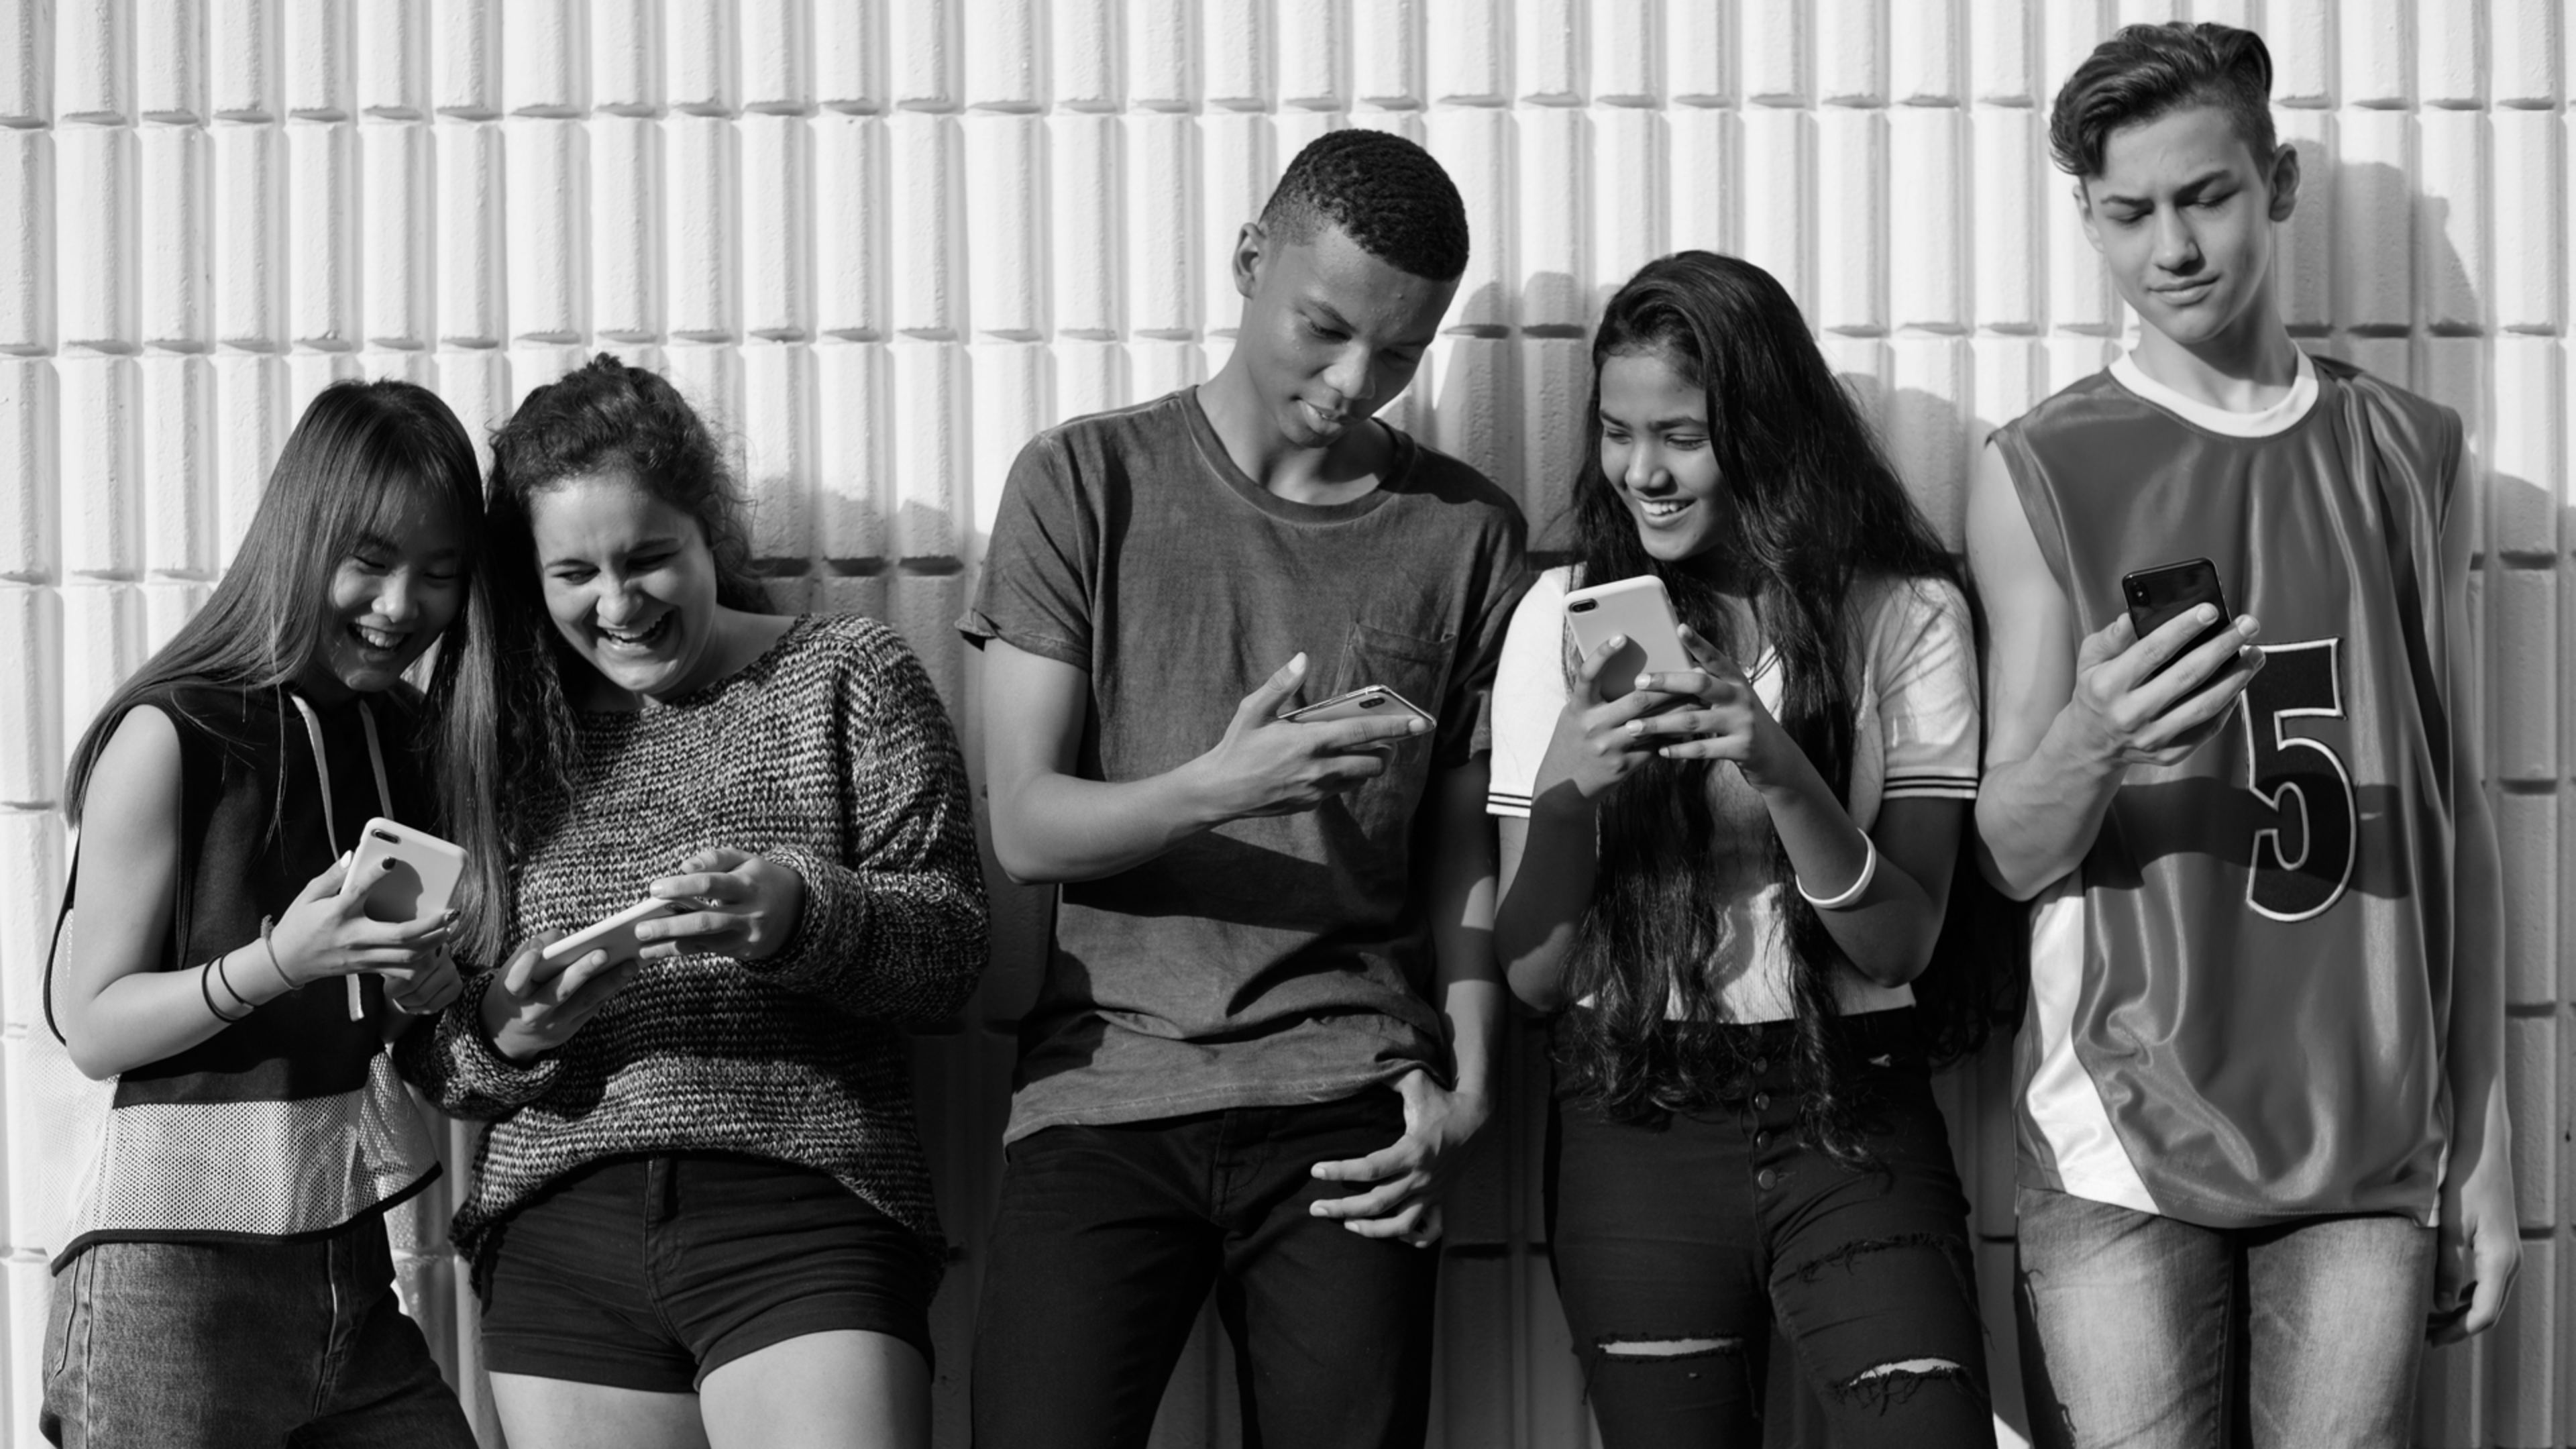 Teens are ditching Facebook like mad